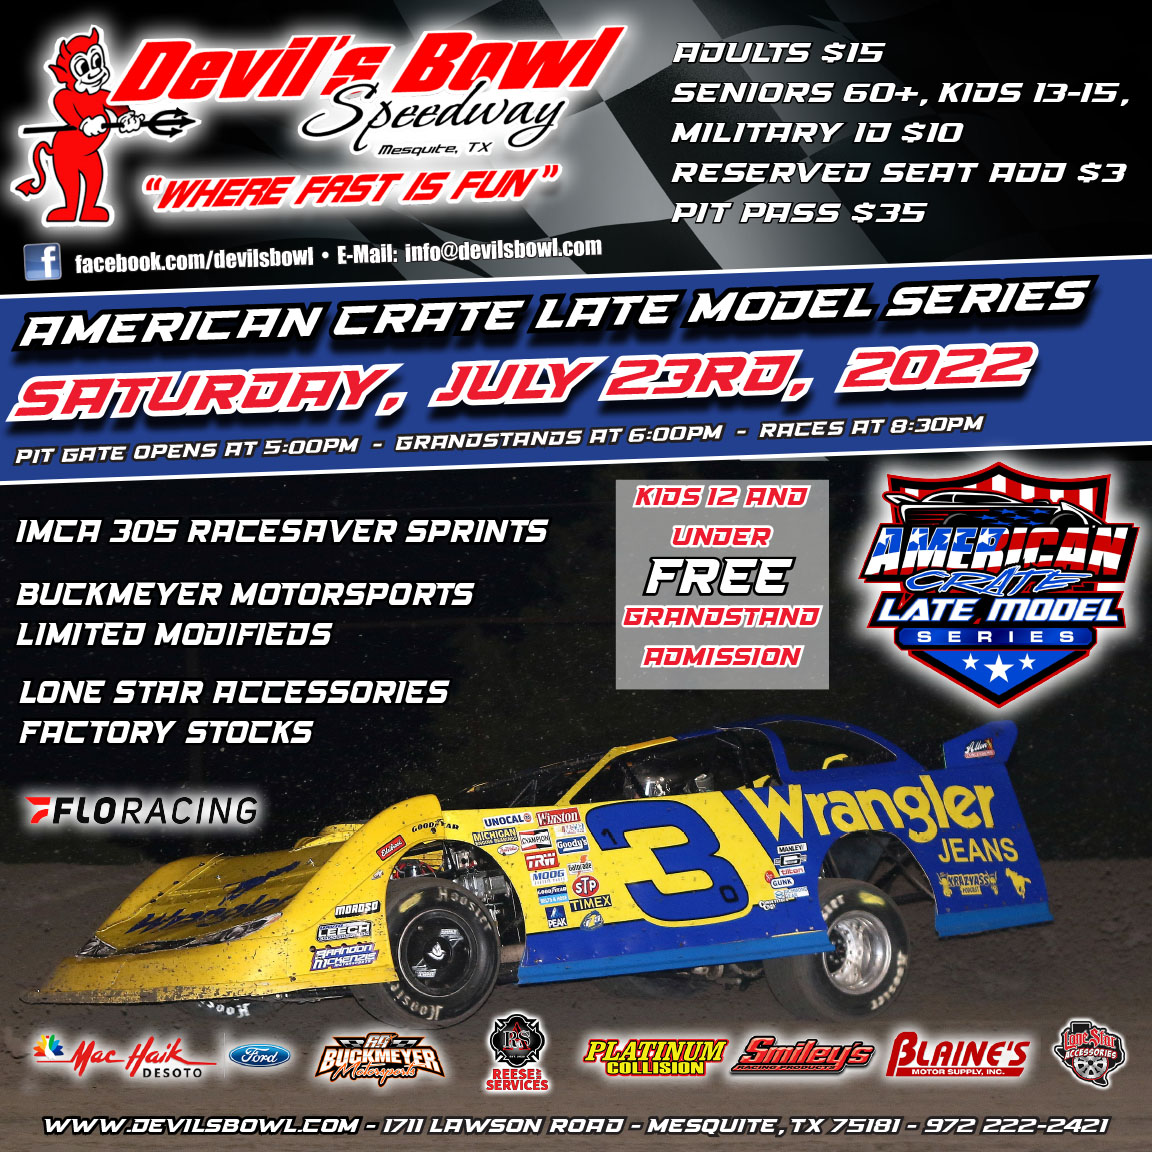 Devil's Bowl Speedway The Birthplace of the World of Outlaws